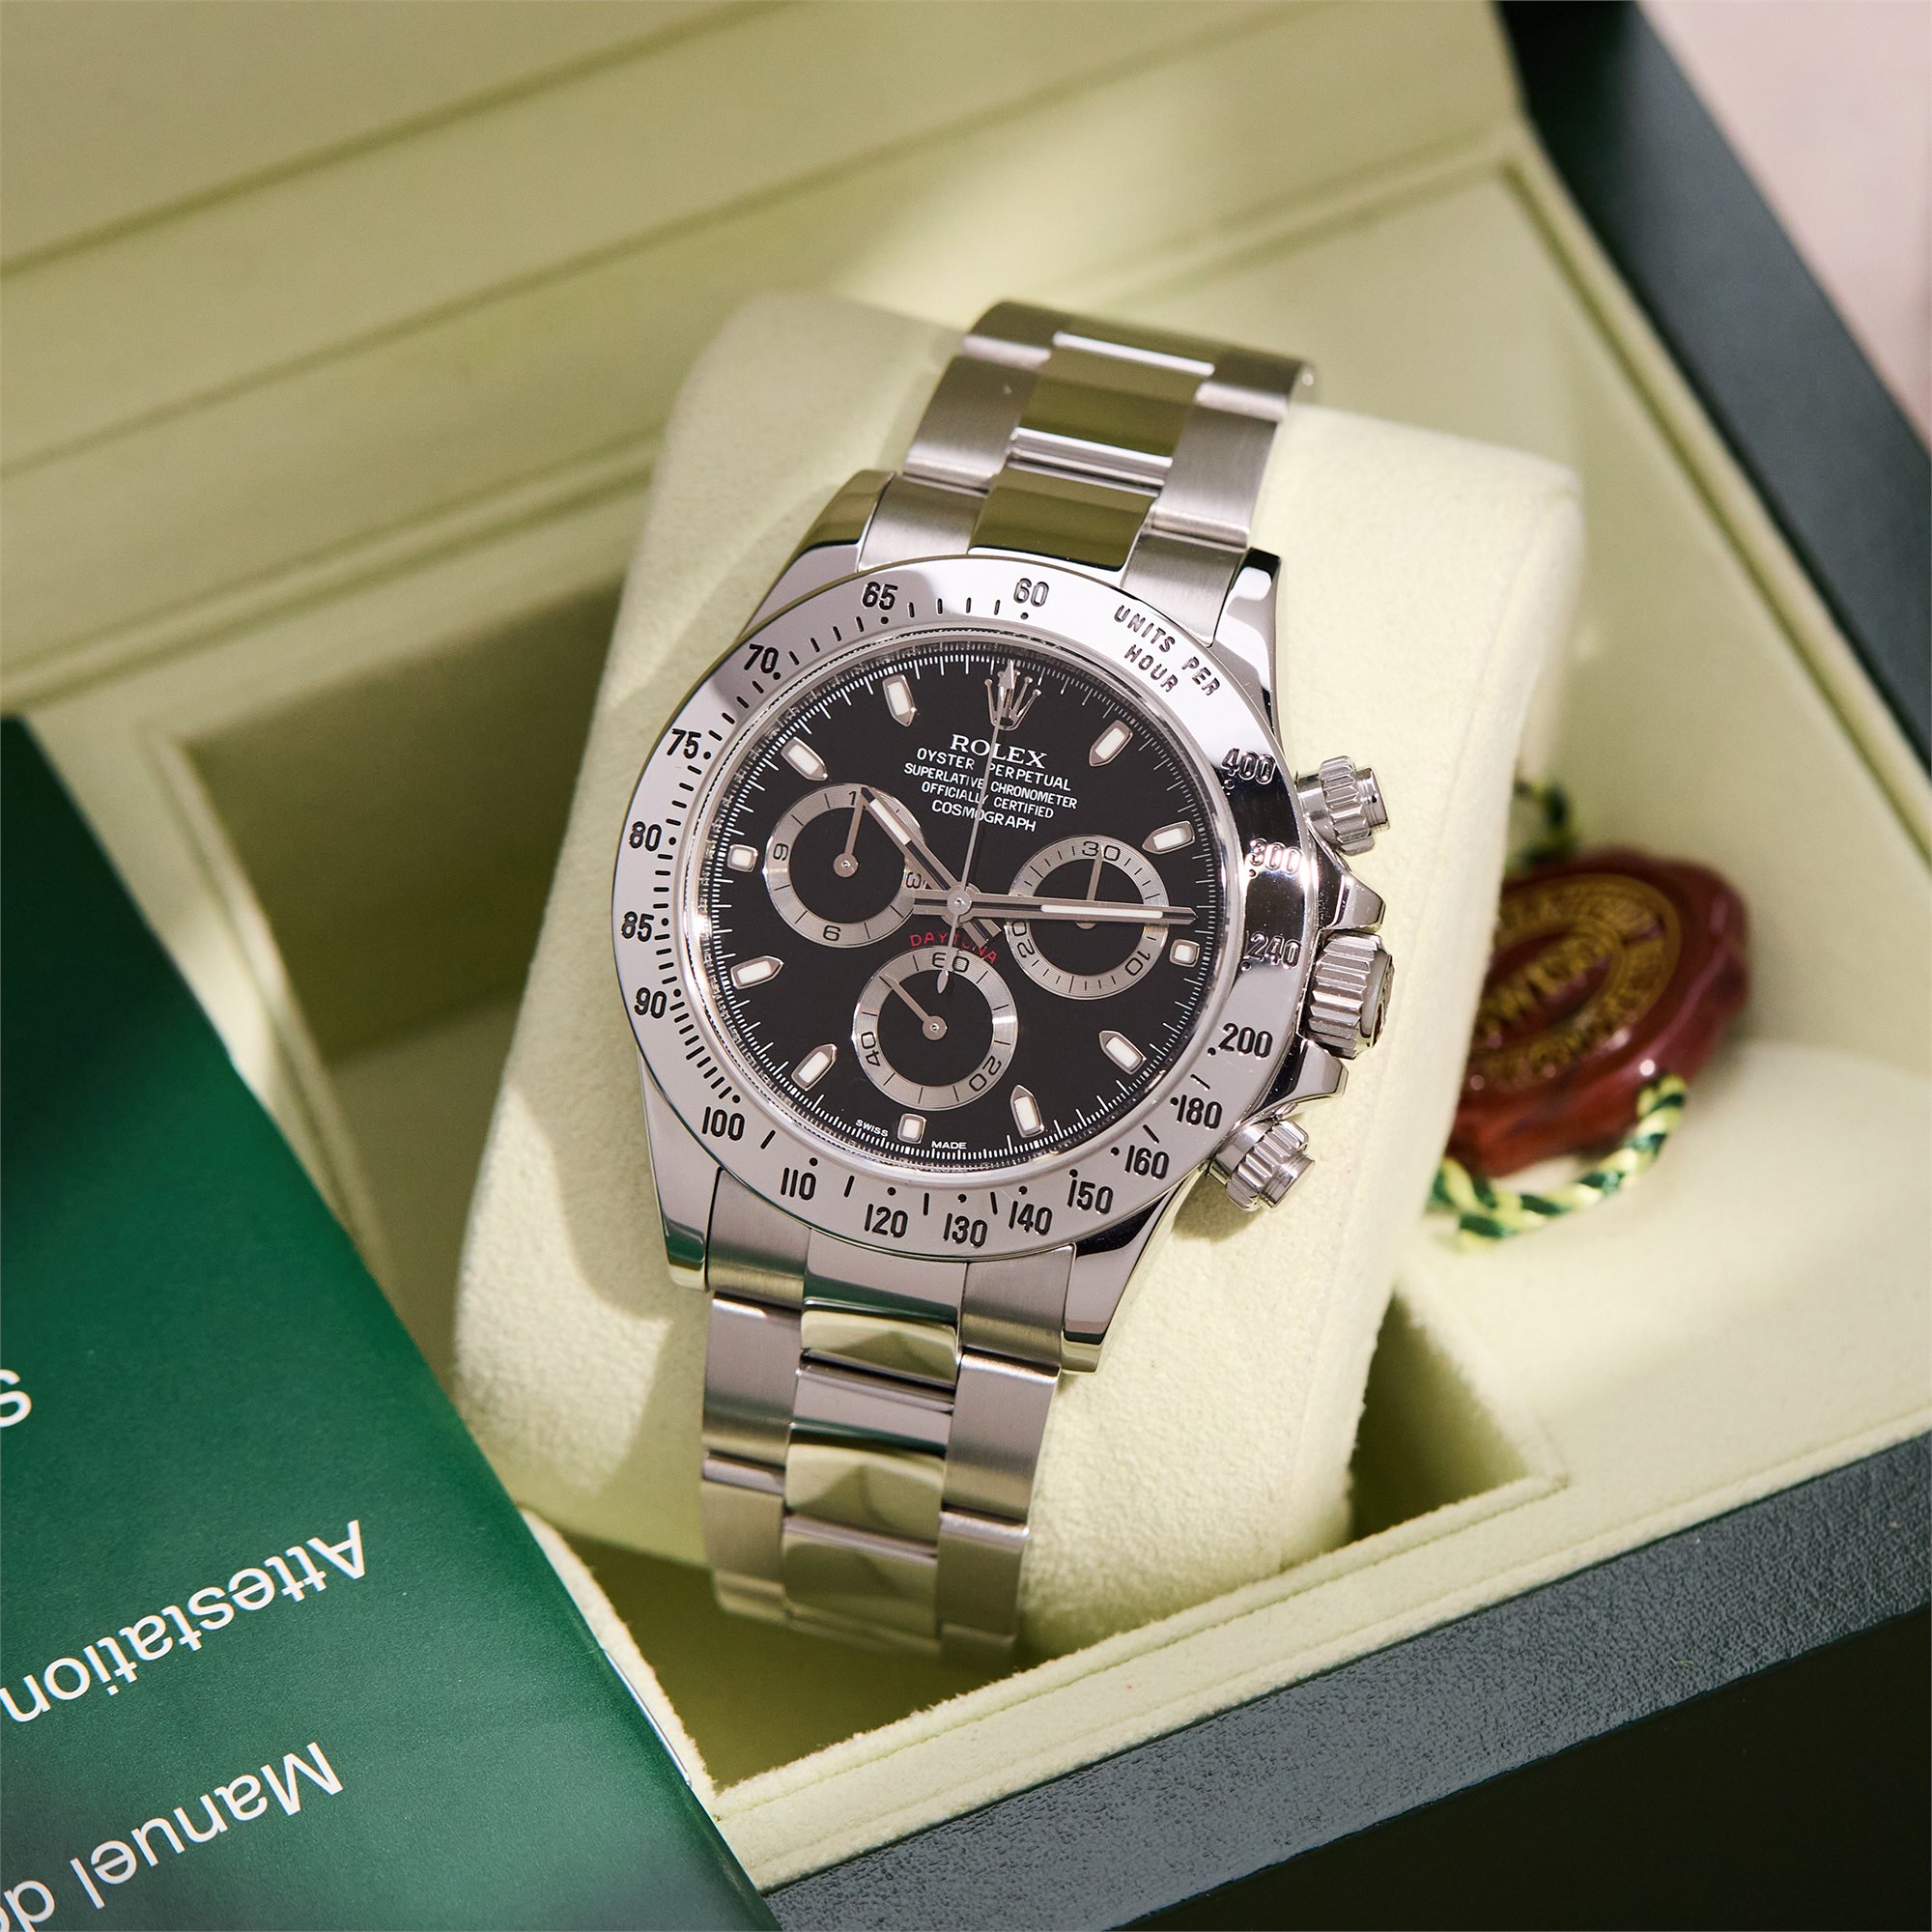 Rolex Daytona APH Dial Stainless Steel 116520